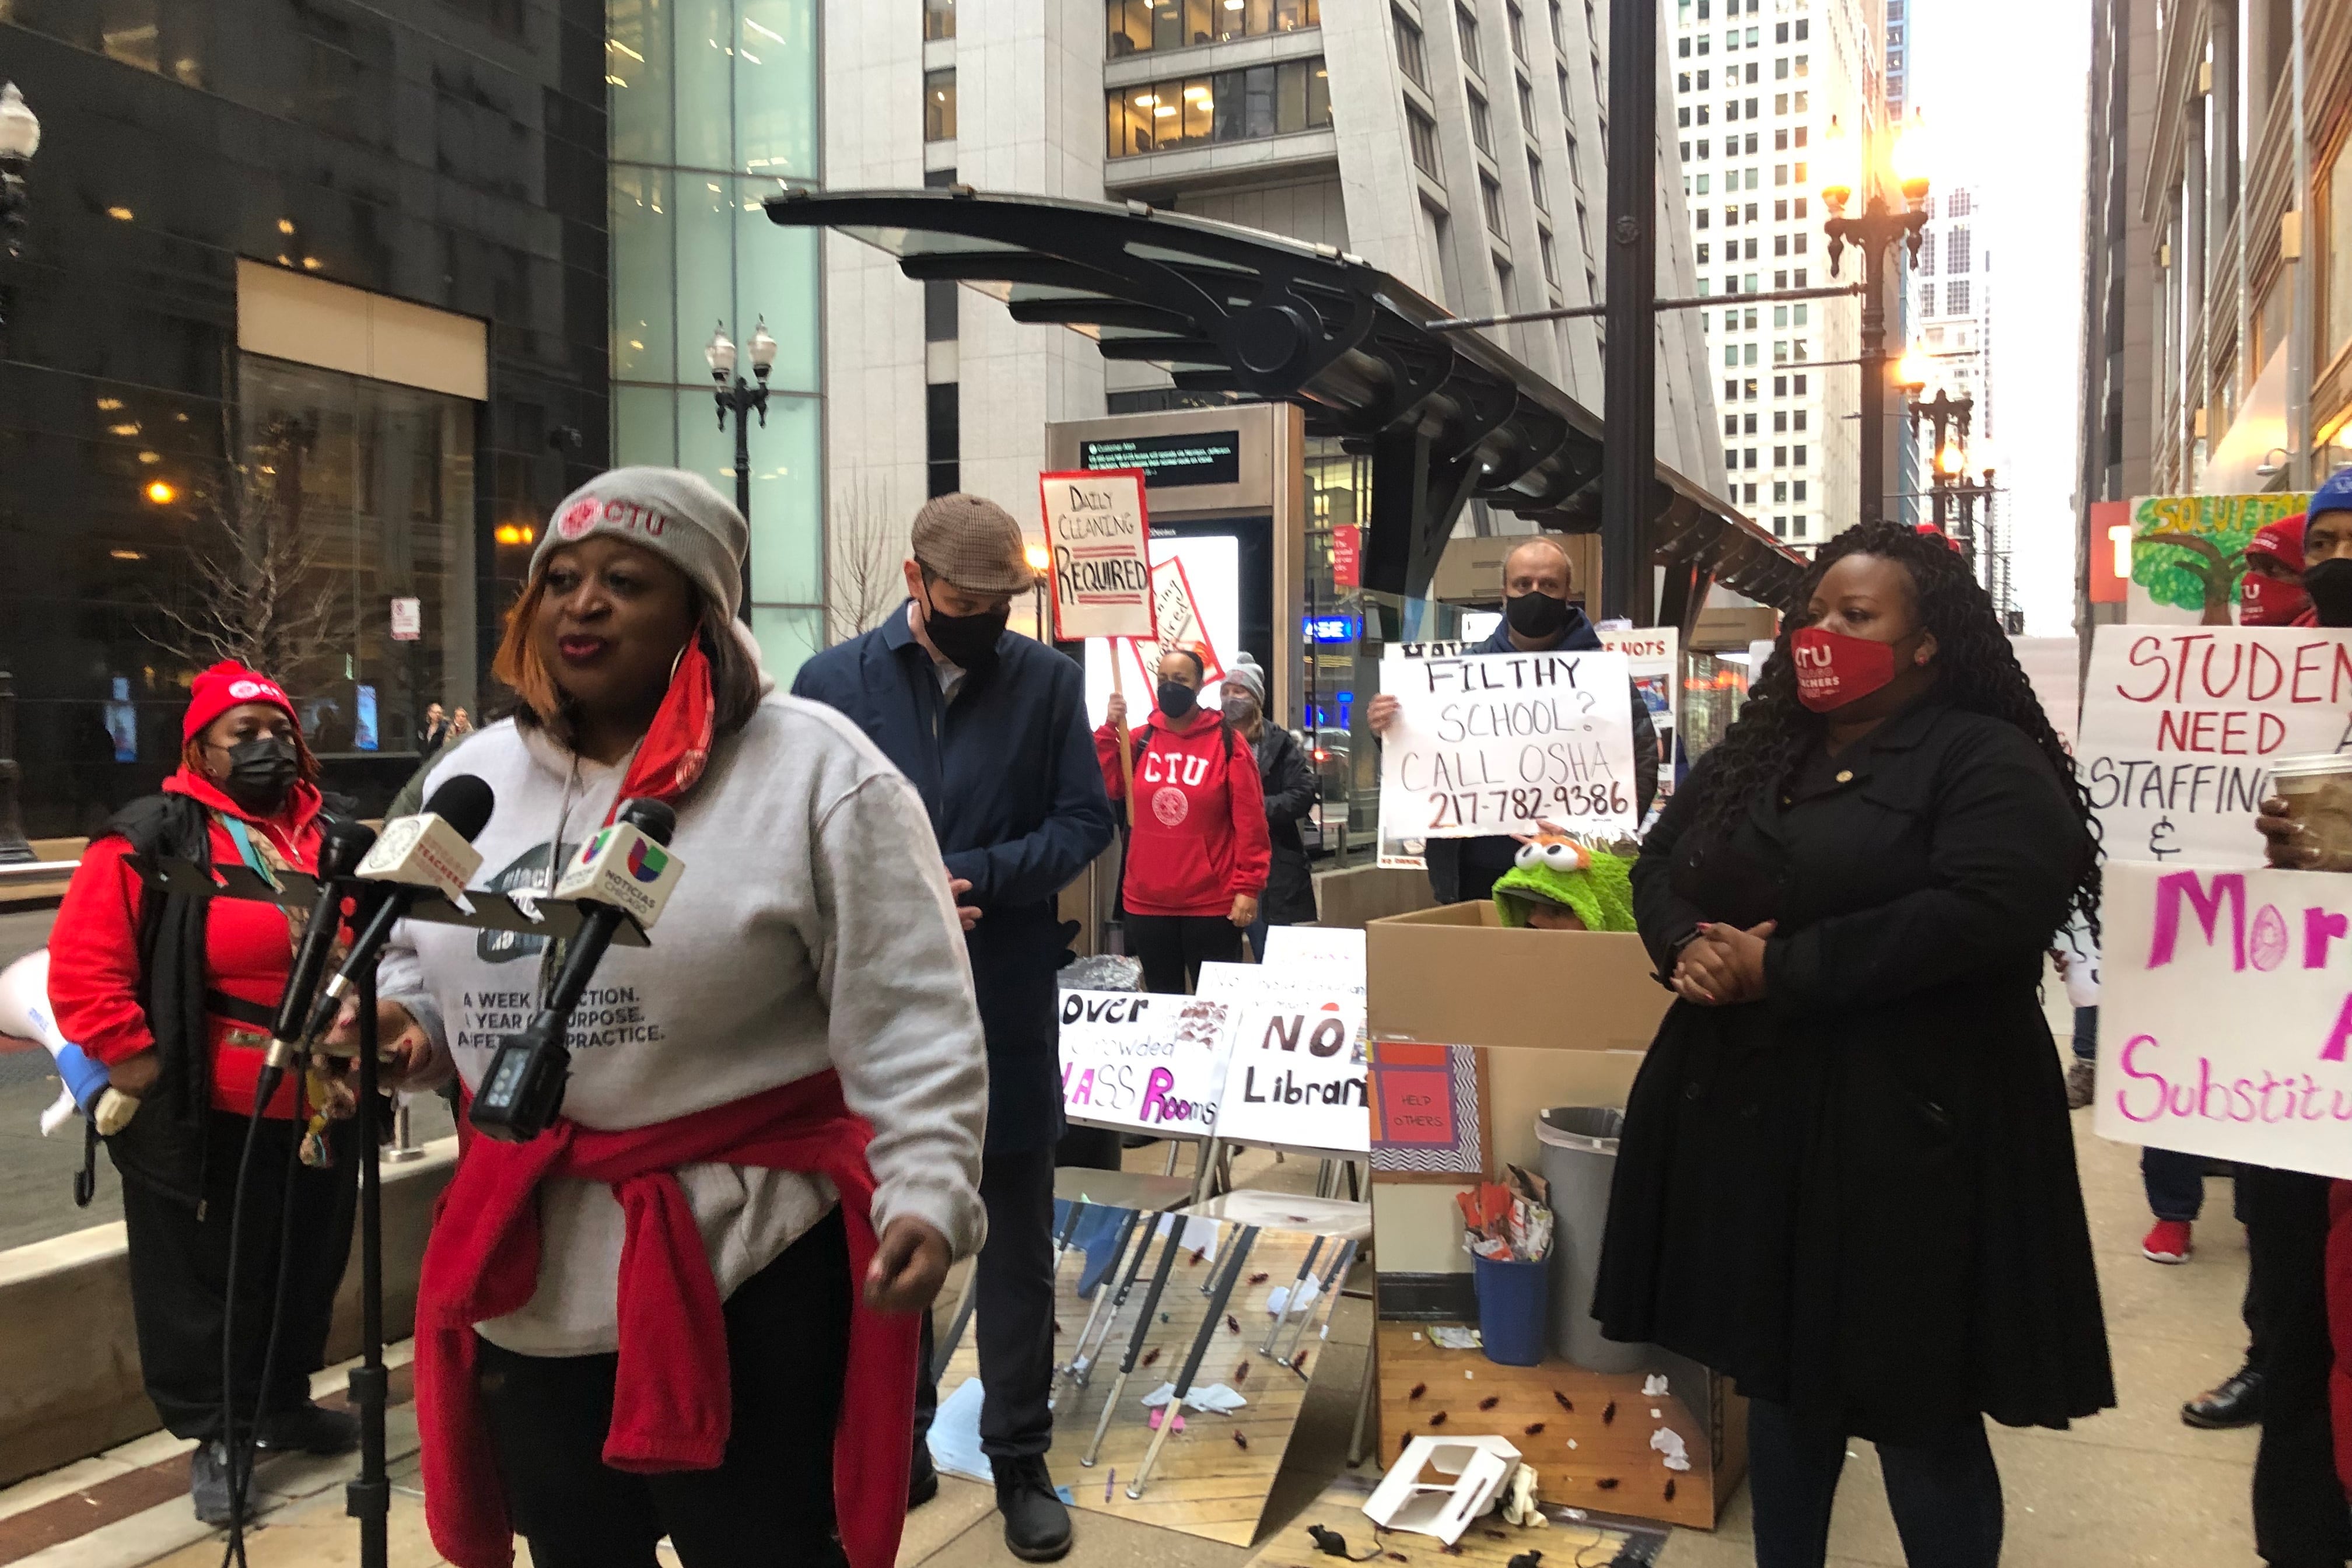 A woman at a microphone stand surrounded by members of the Chicago Teachers Union.